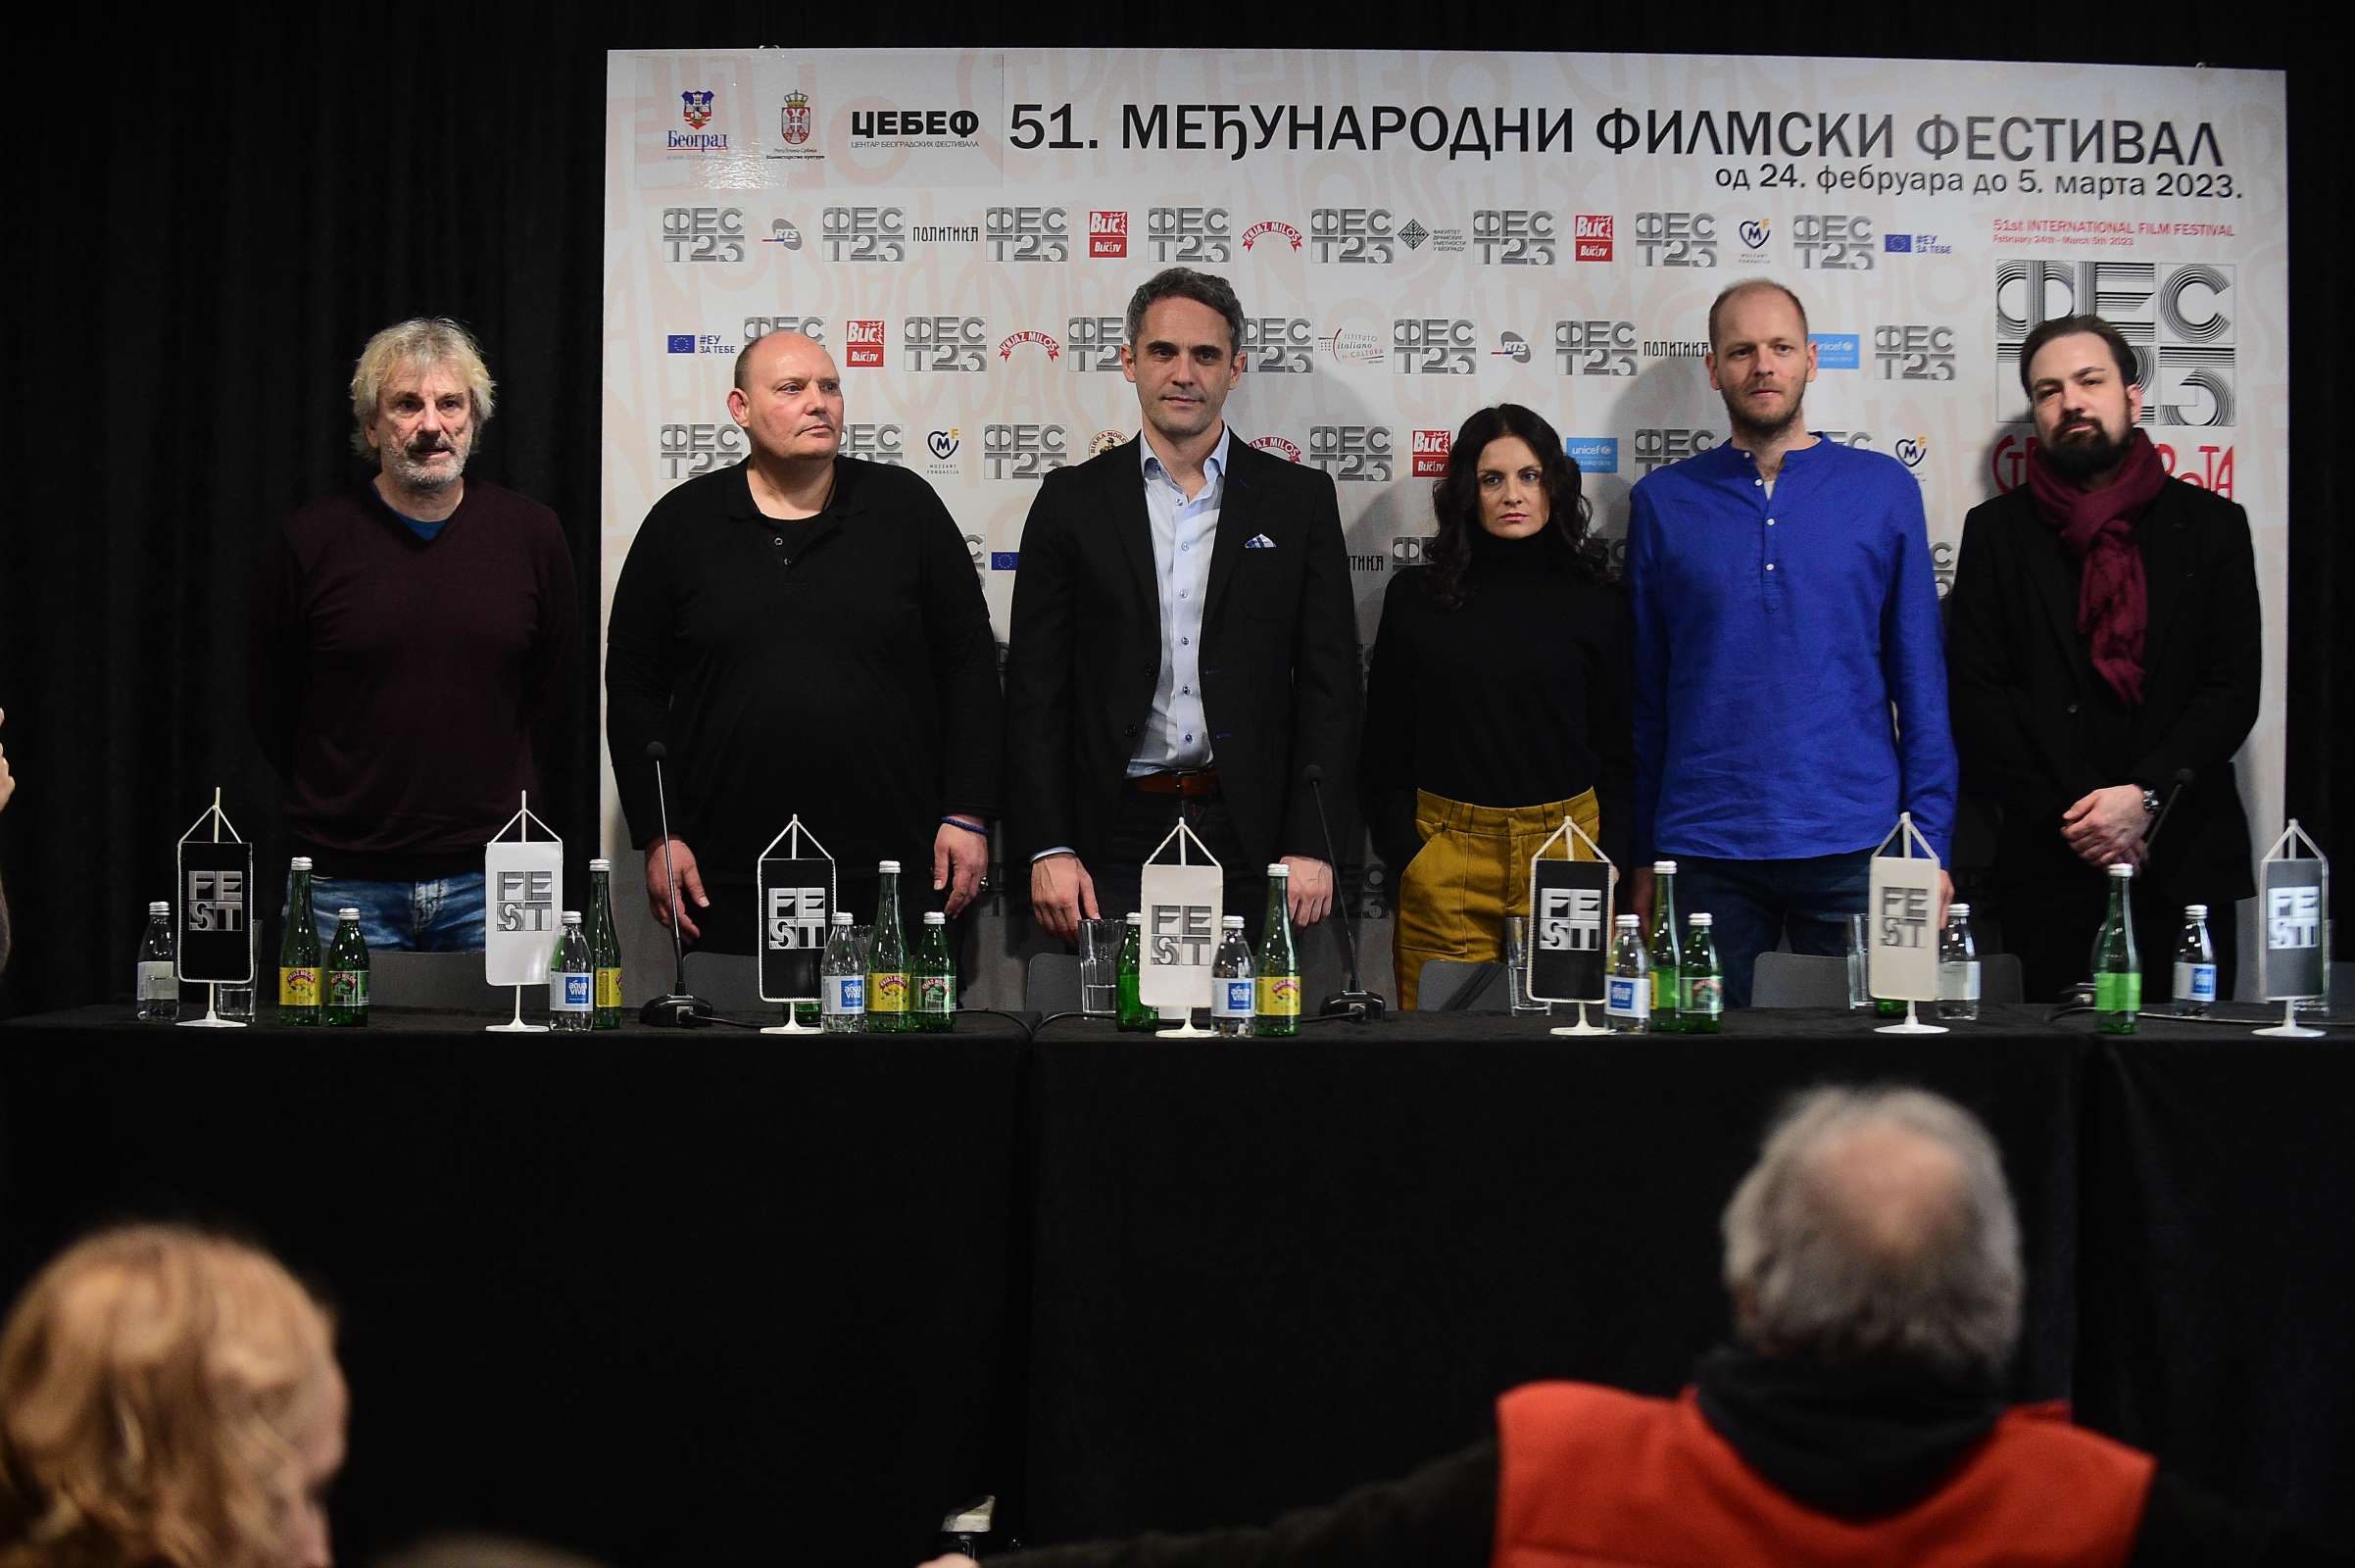 PREMIERE OF FILM BY PURIŠA ĐORĐEVIĆ ‘MOUTH FULL OF EARTH’ CLOSES 51ST FEST ON 5 MARCH